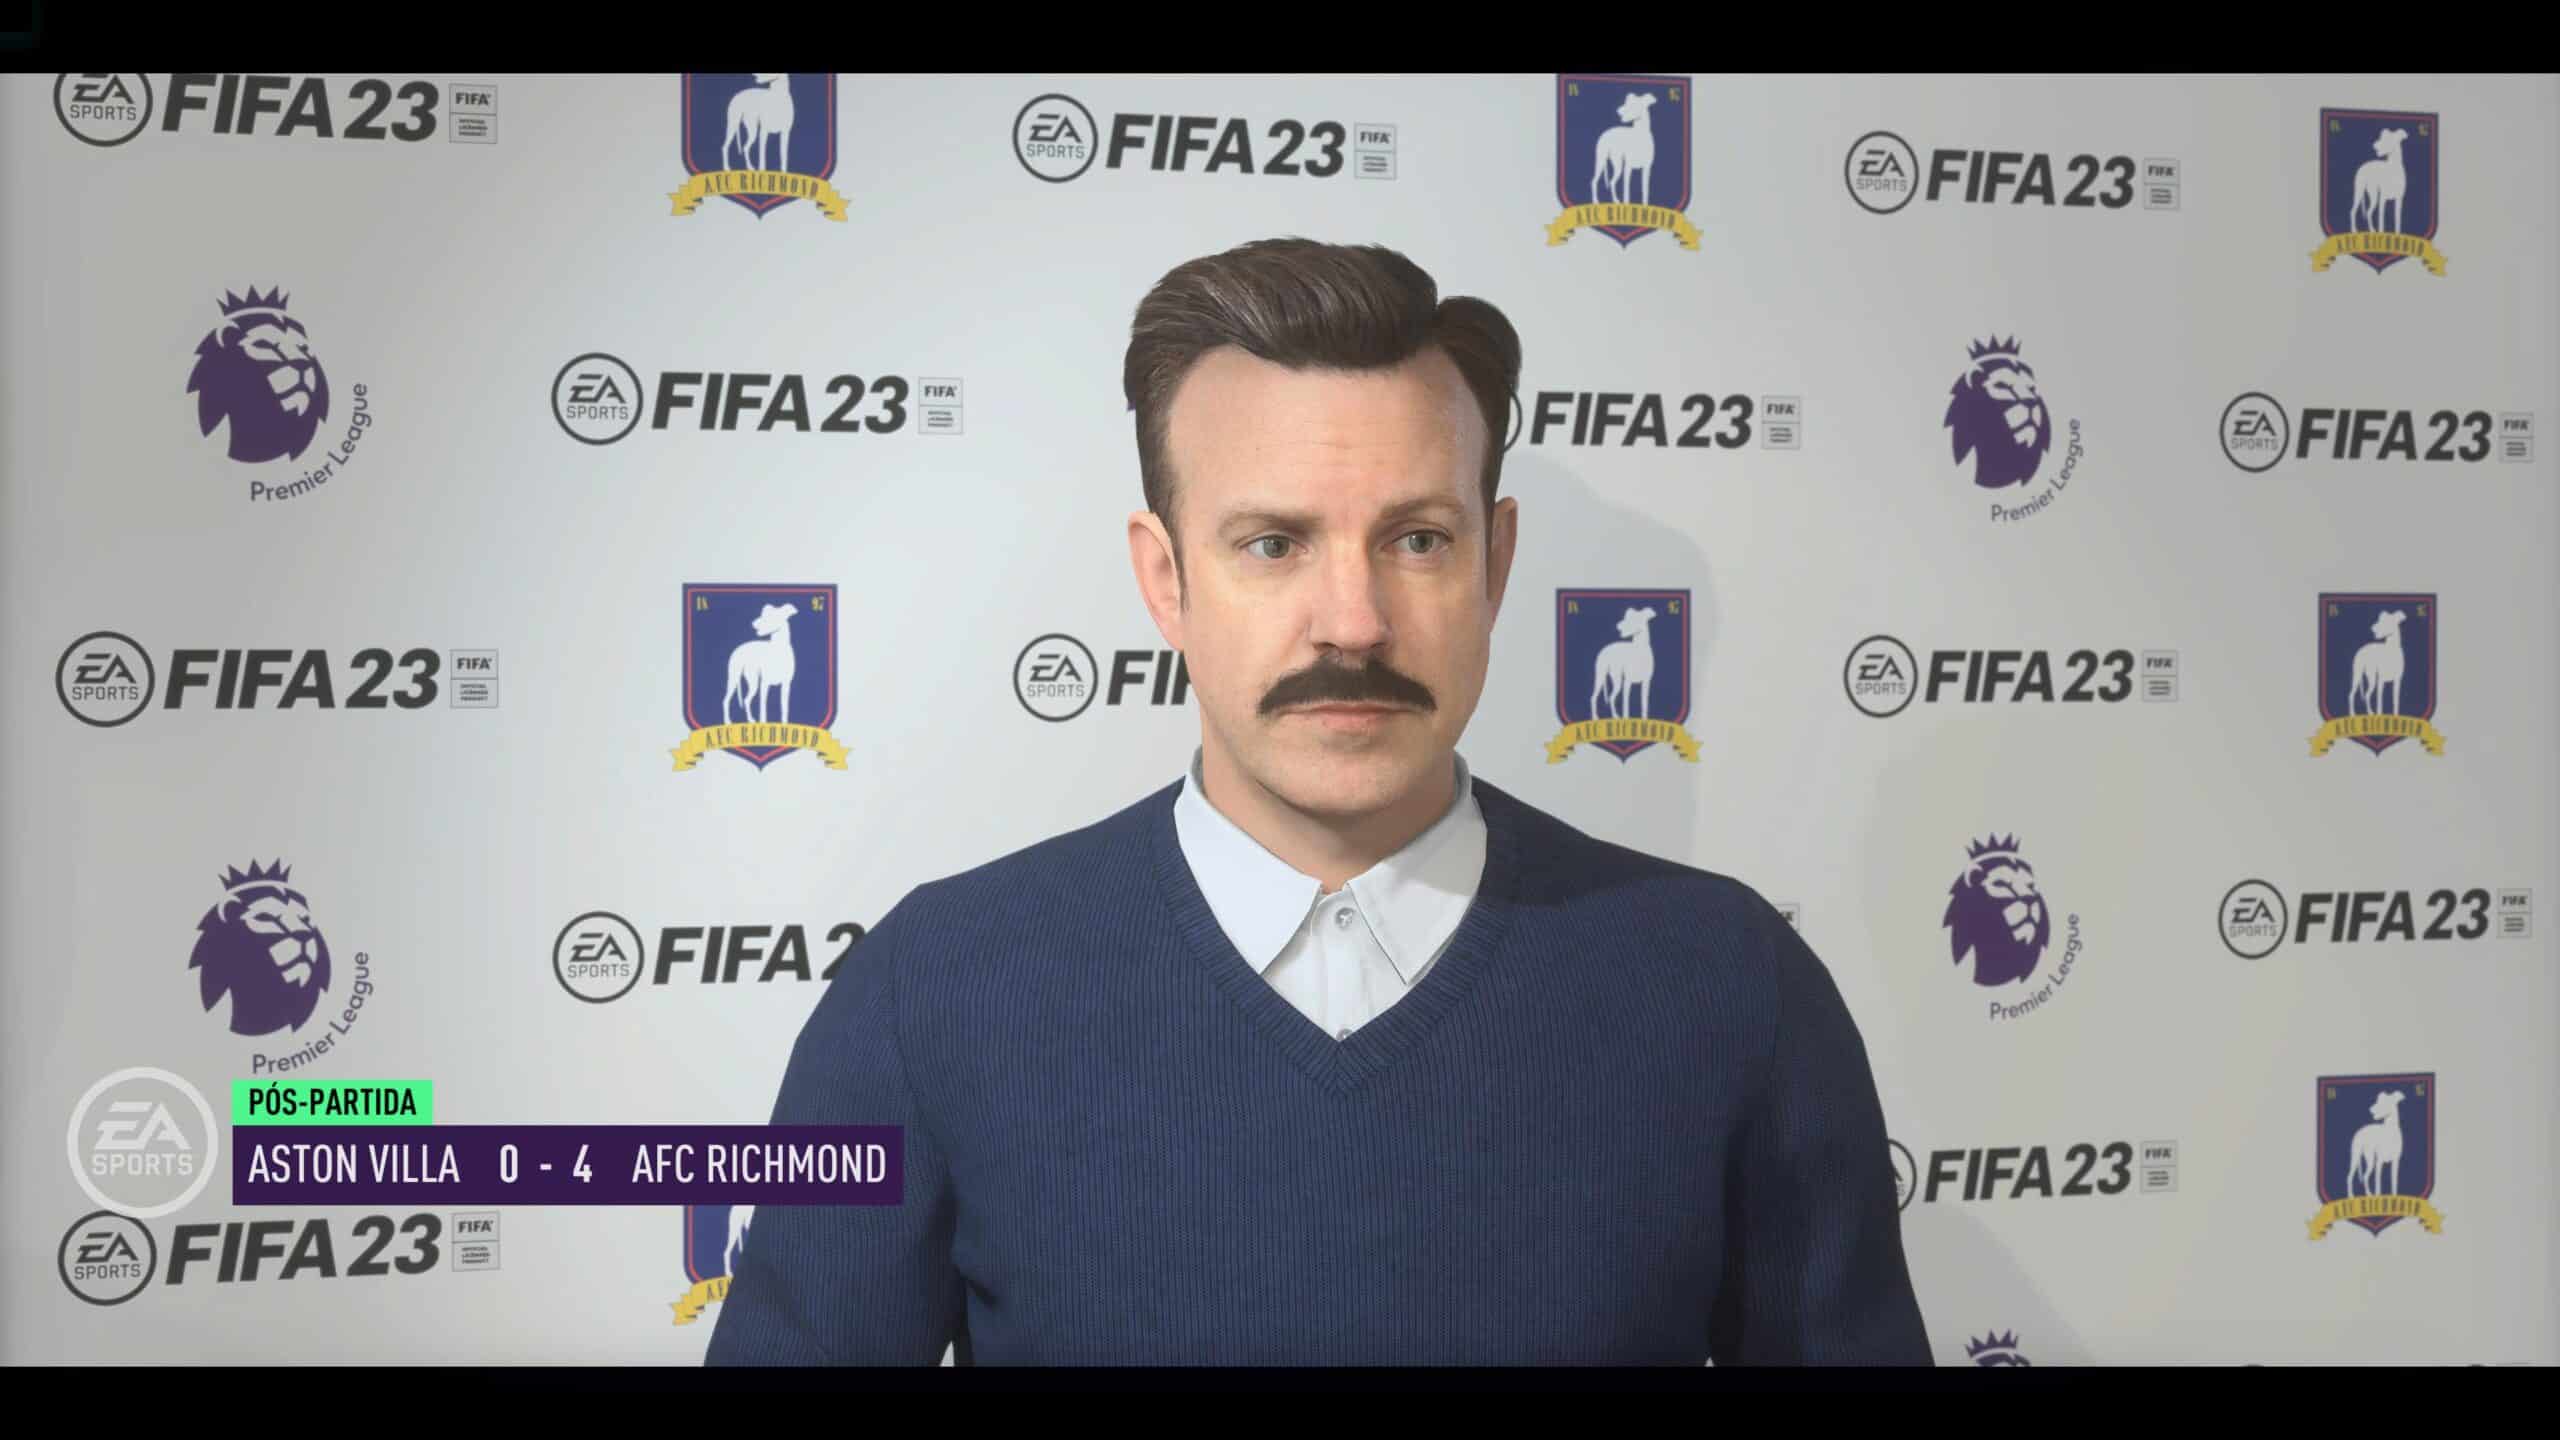 Ted Lasso was a great shot in FIFA 23 (Photo: Reproduction/Thiago Barros)